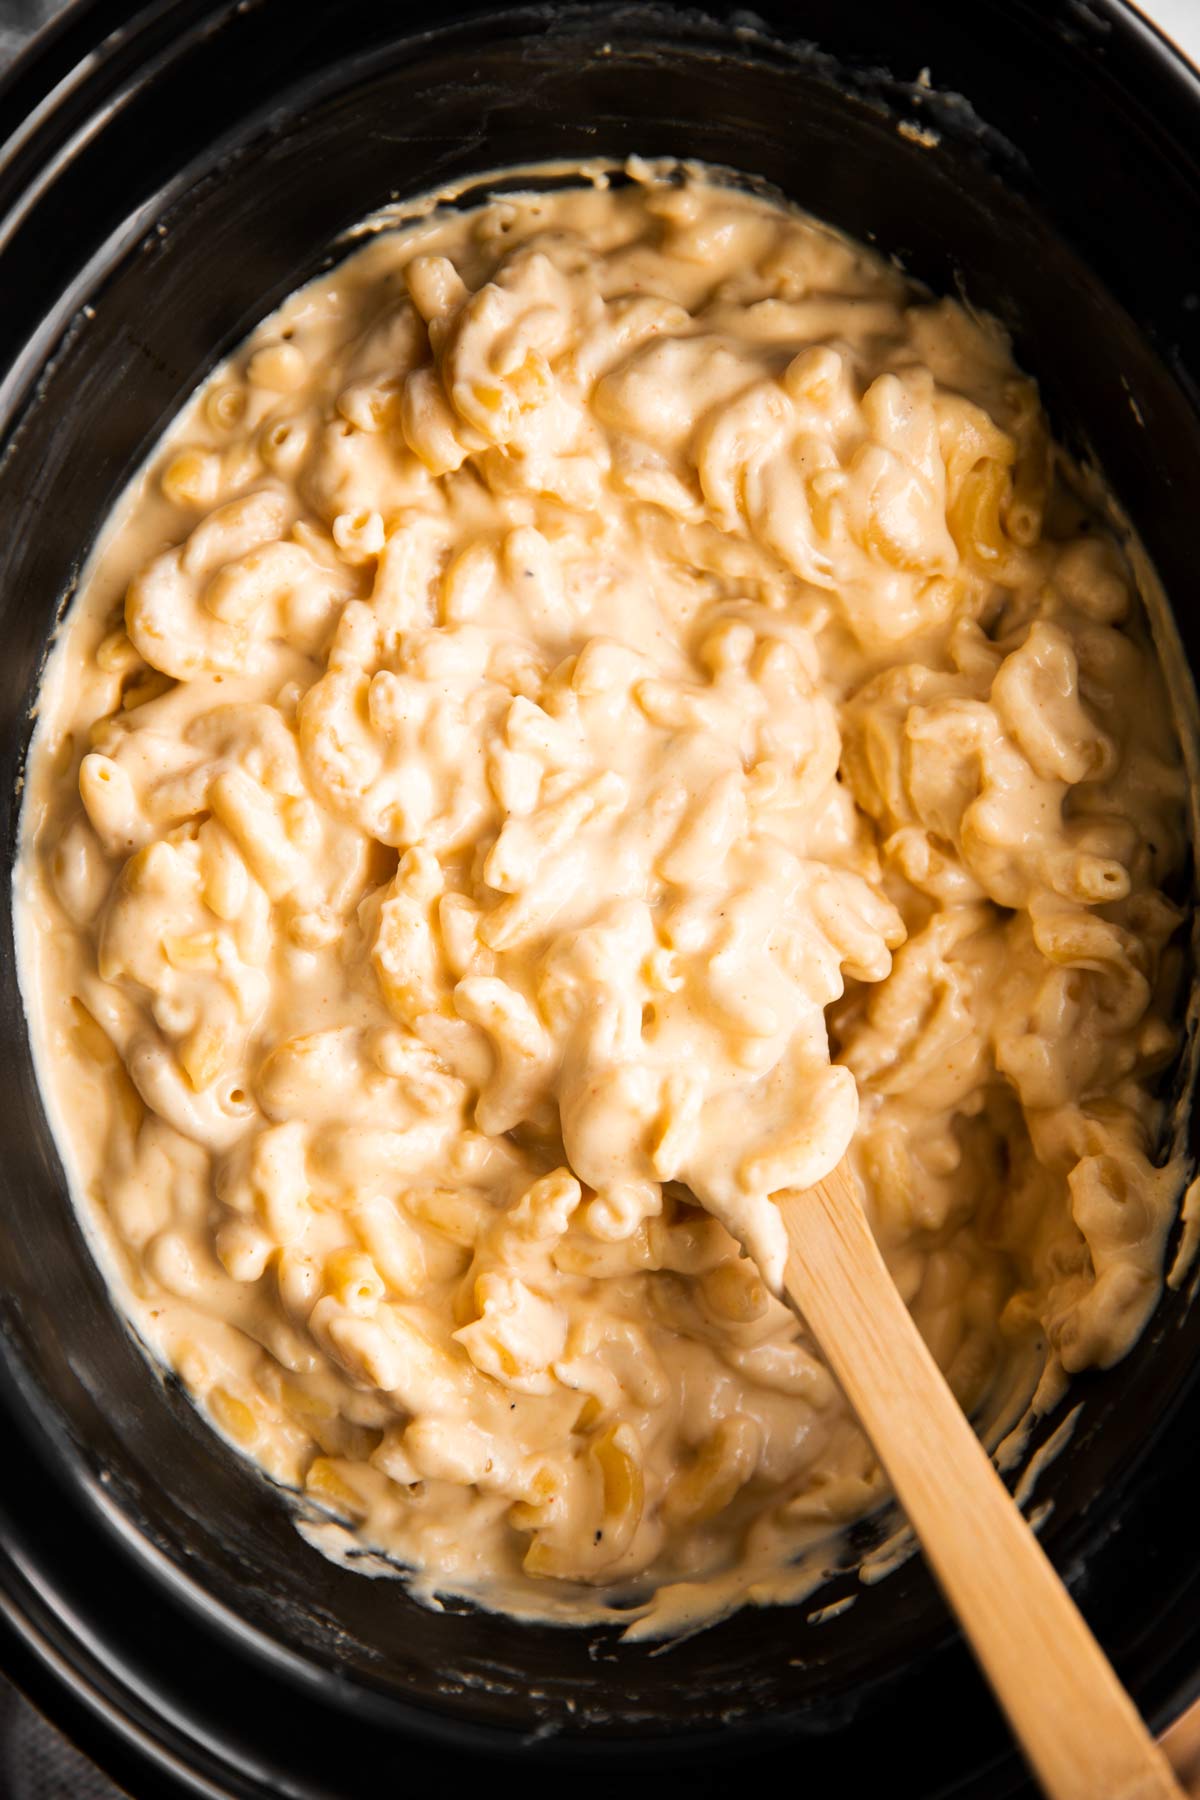 close up of crockpot with macaroni and cheese inside